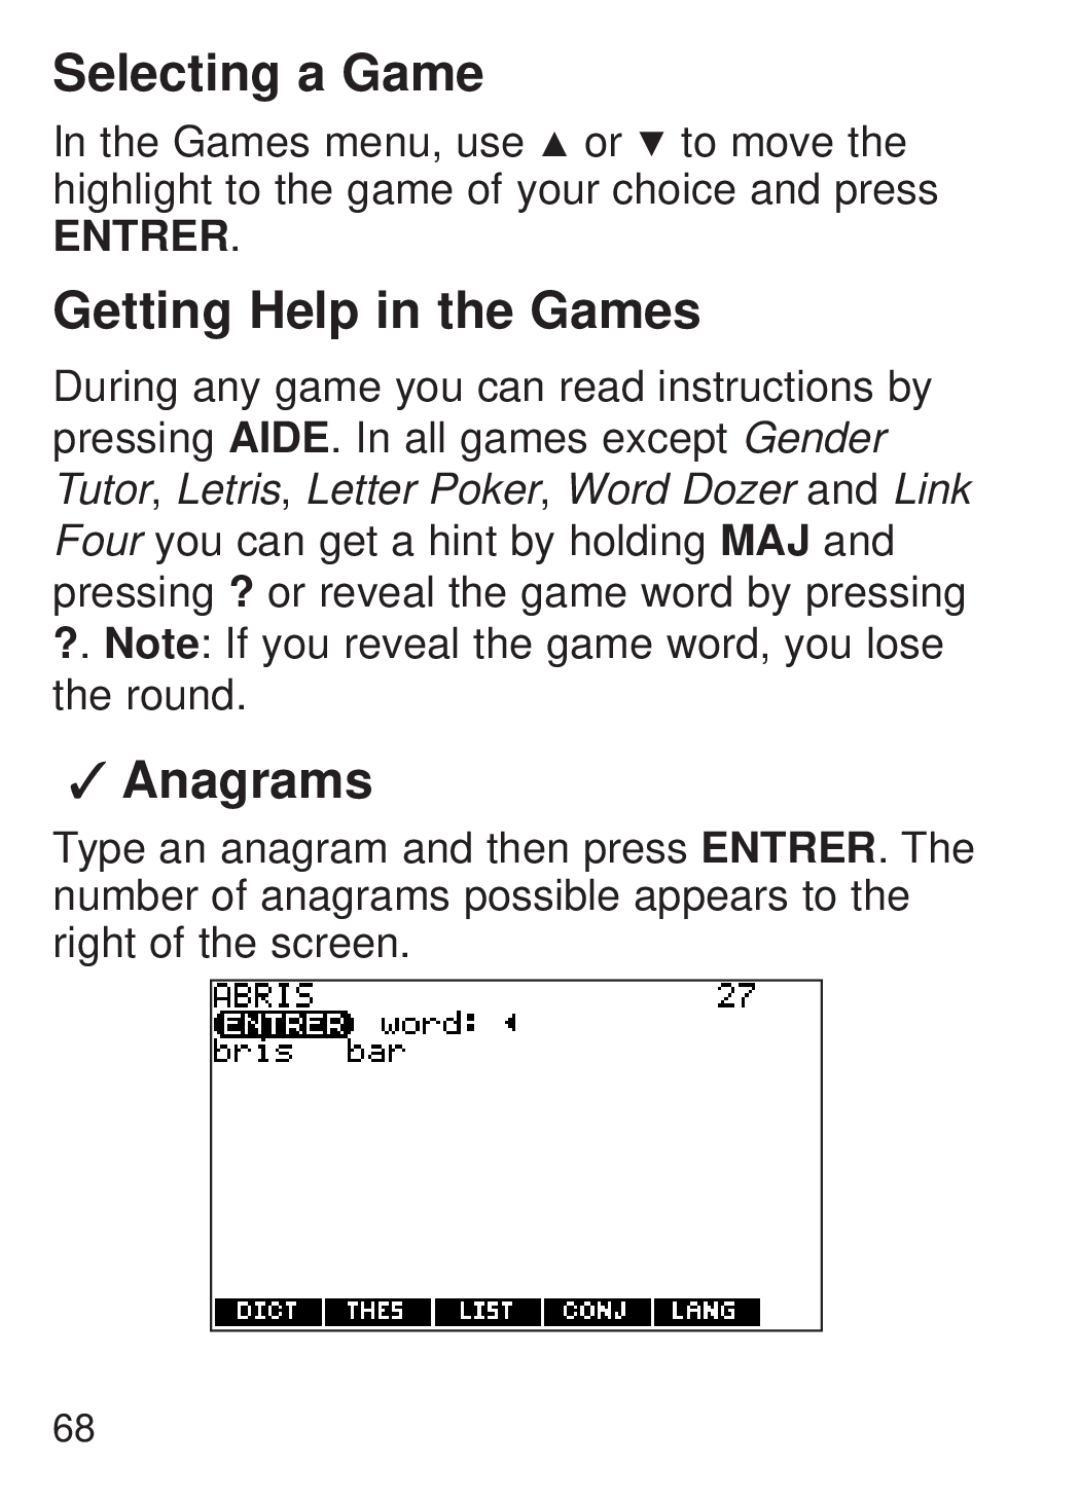 Franklin FQS-1870 manual Selecting a Game, Getting Help in the Games, Anagrams 